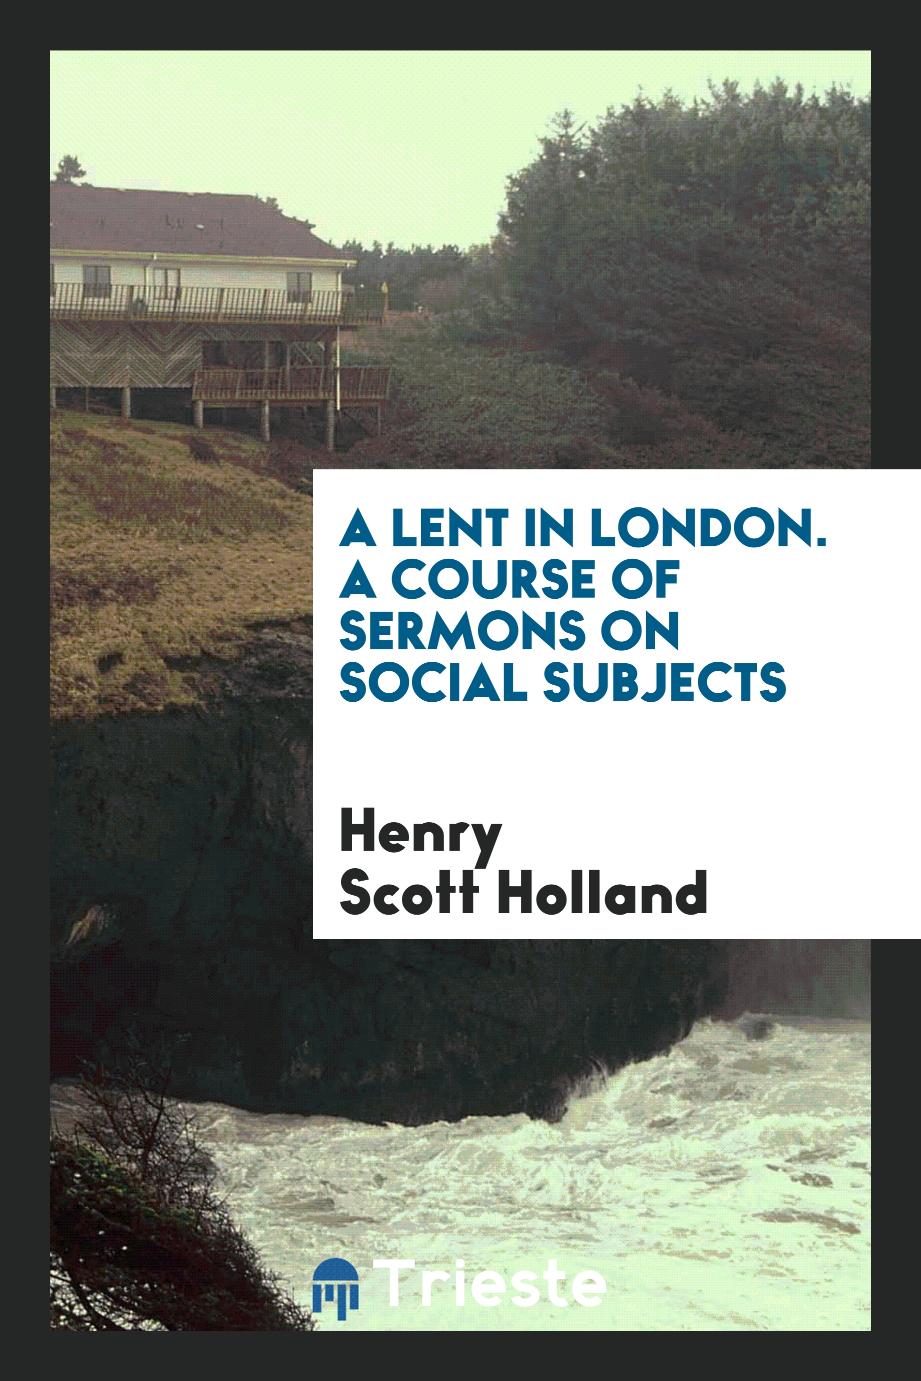 A Lent in London. A course of sermons on social subjects